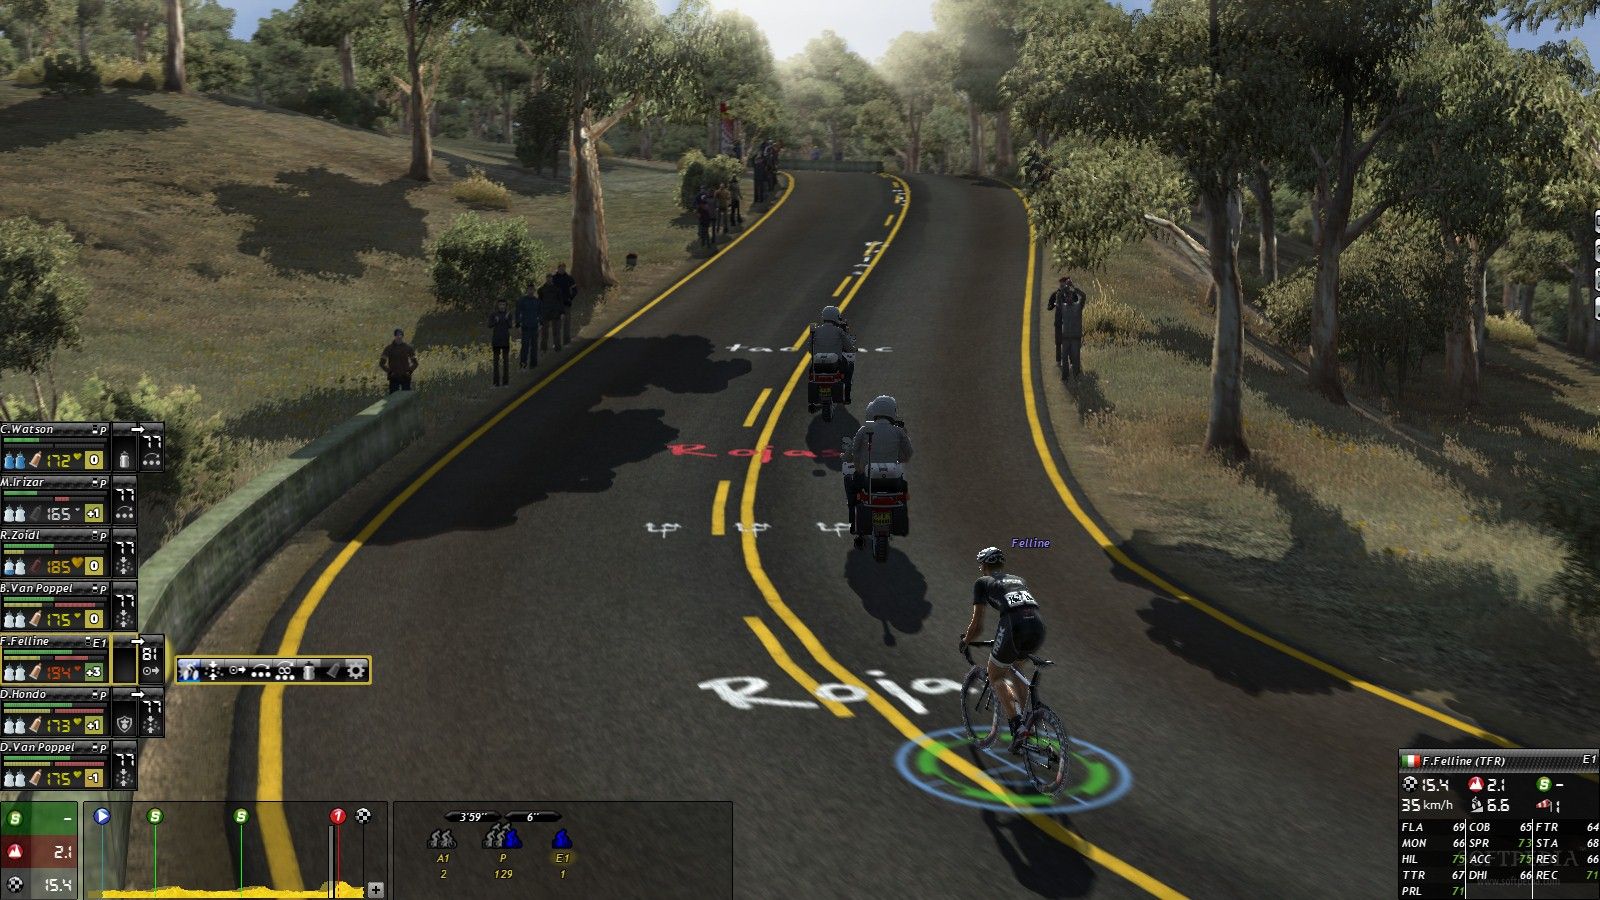 Download Pro Cycling Manager 2014 Free Full PC Game